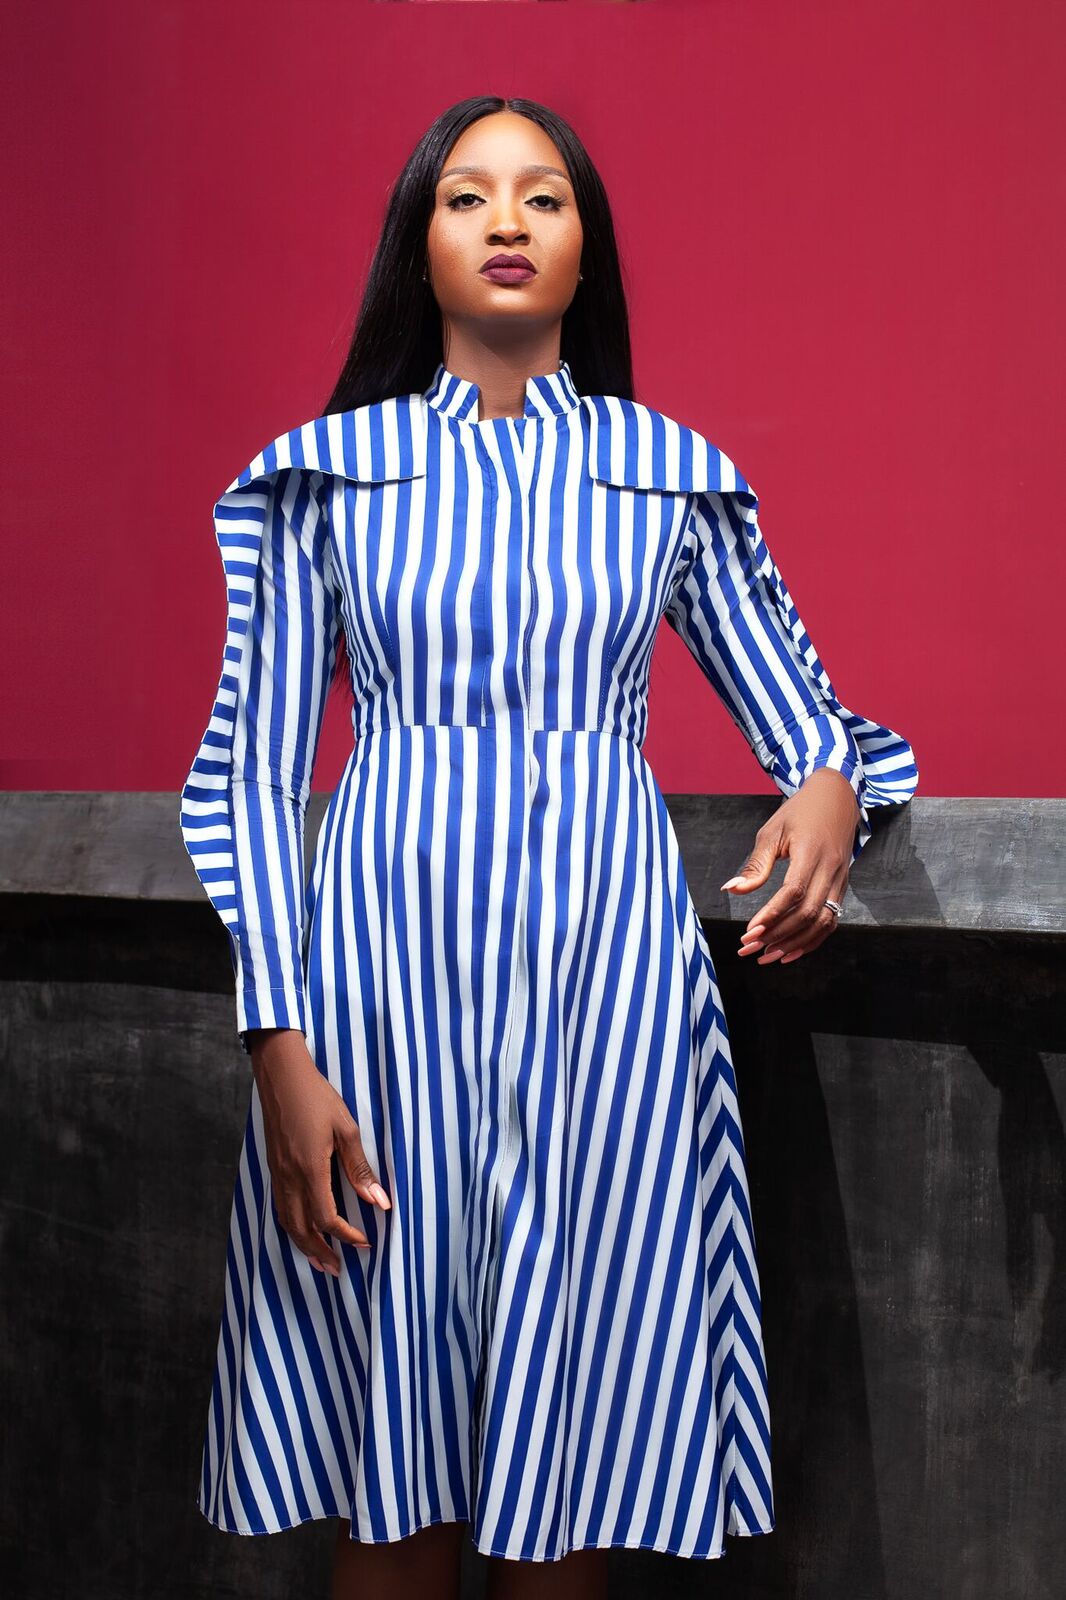 Powede Awujo Is The Perfect Muse For Lady Biba’s “Lady In Line” Campaign